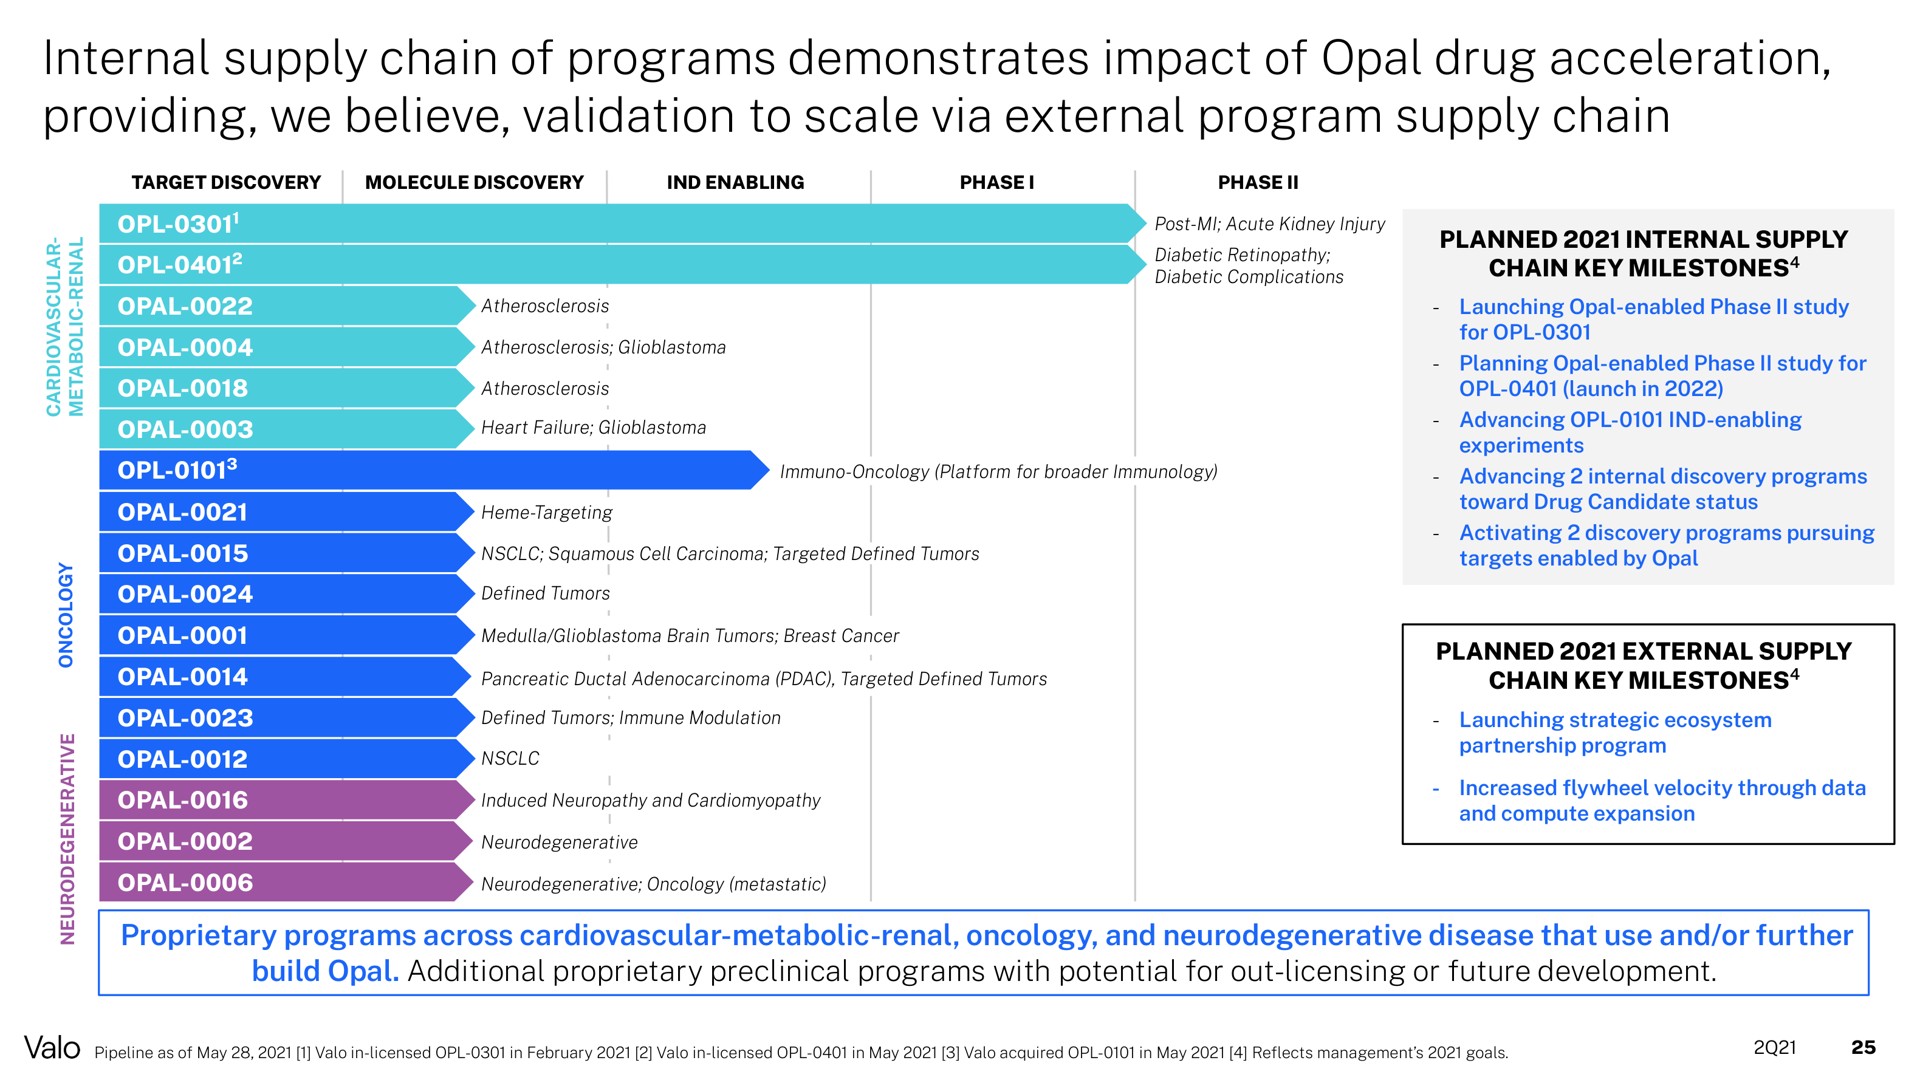 internal supply chain of programs demonstrates impact of opal drug acceleration providing we believe validation to scale via external program supply chain | Valo